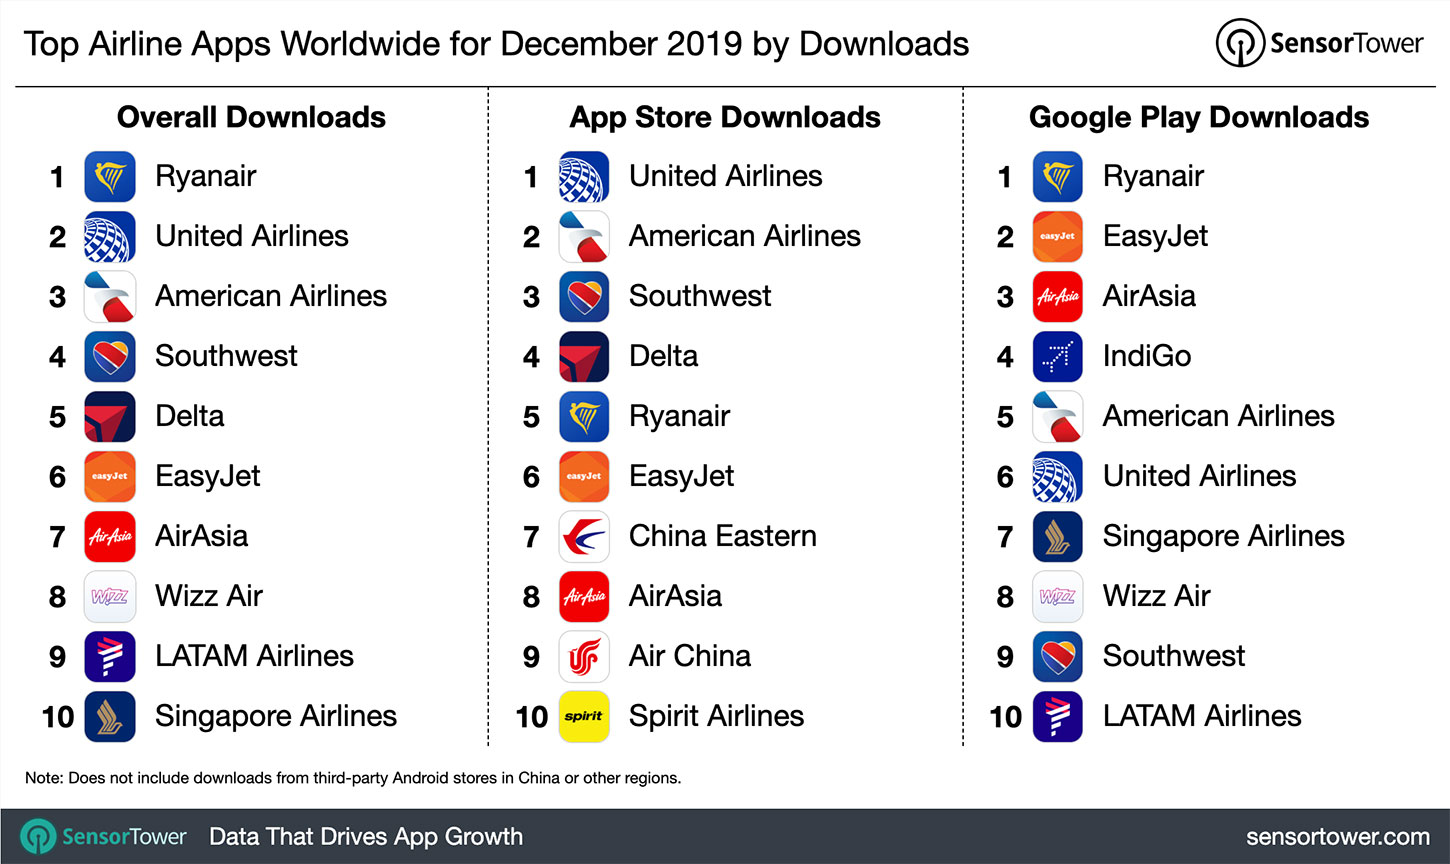 Top Airline Apps Worldwide for December 2019 by Downloads